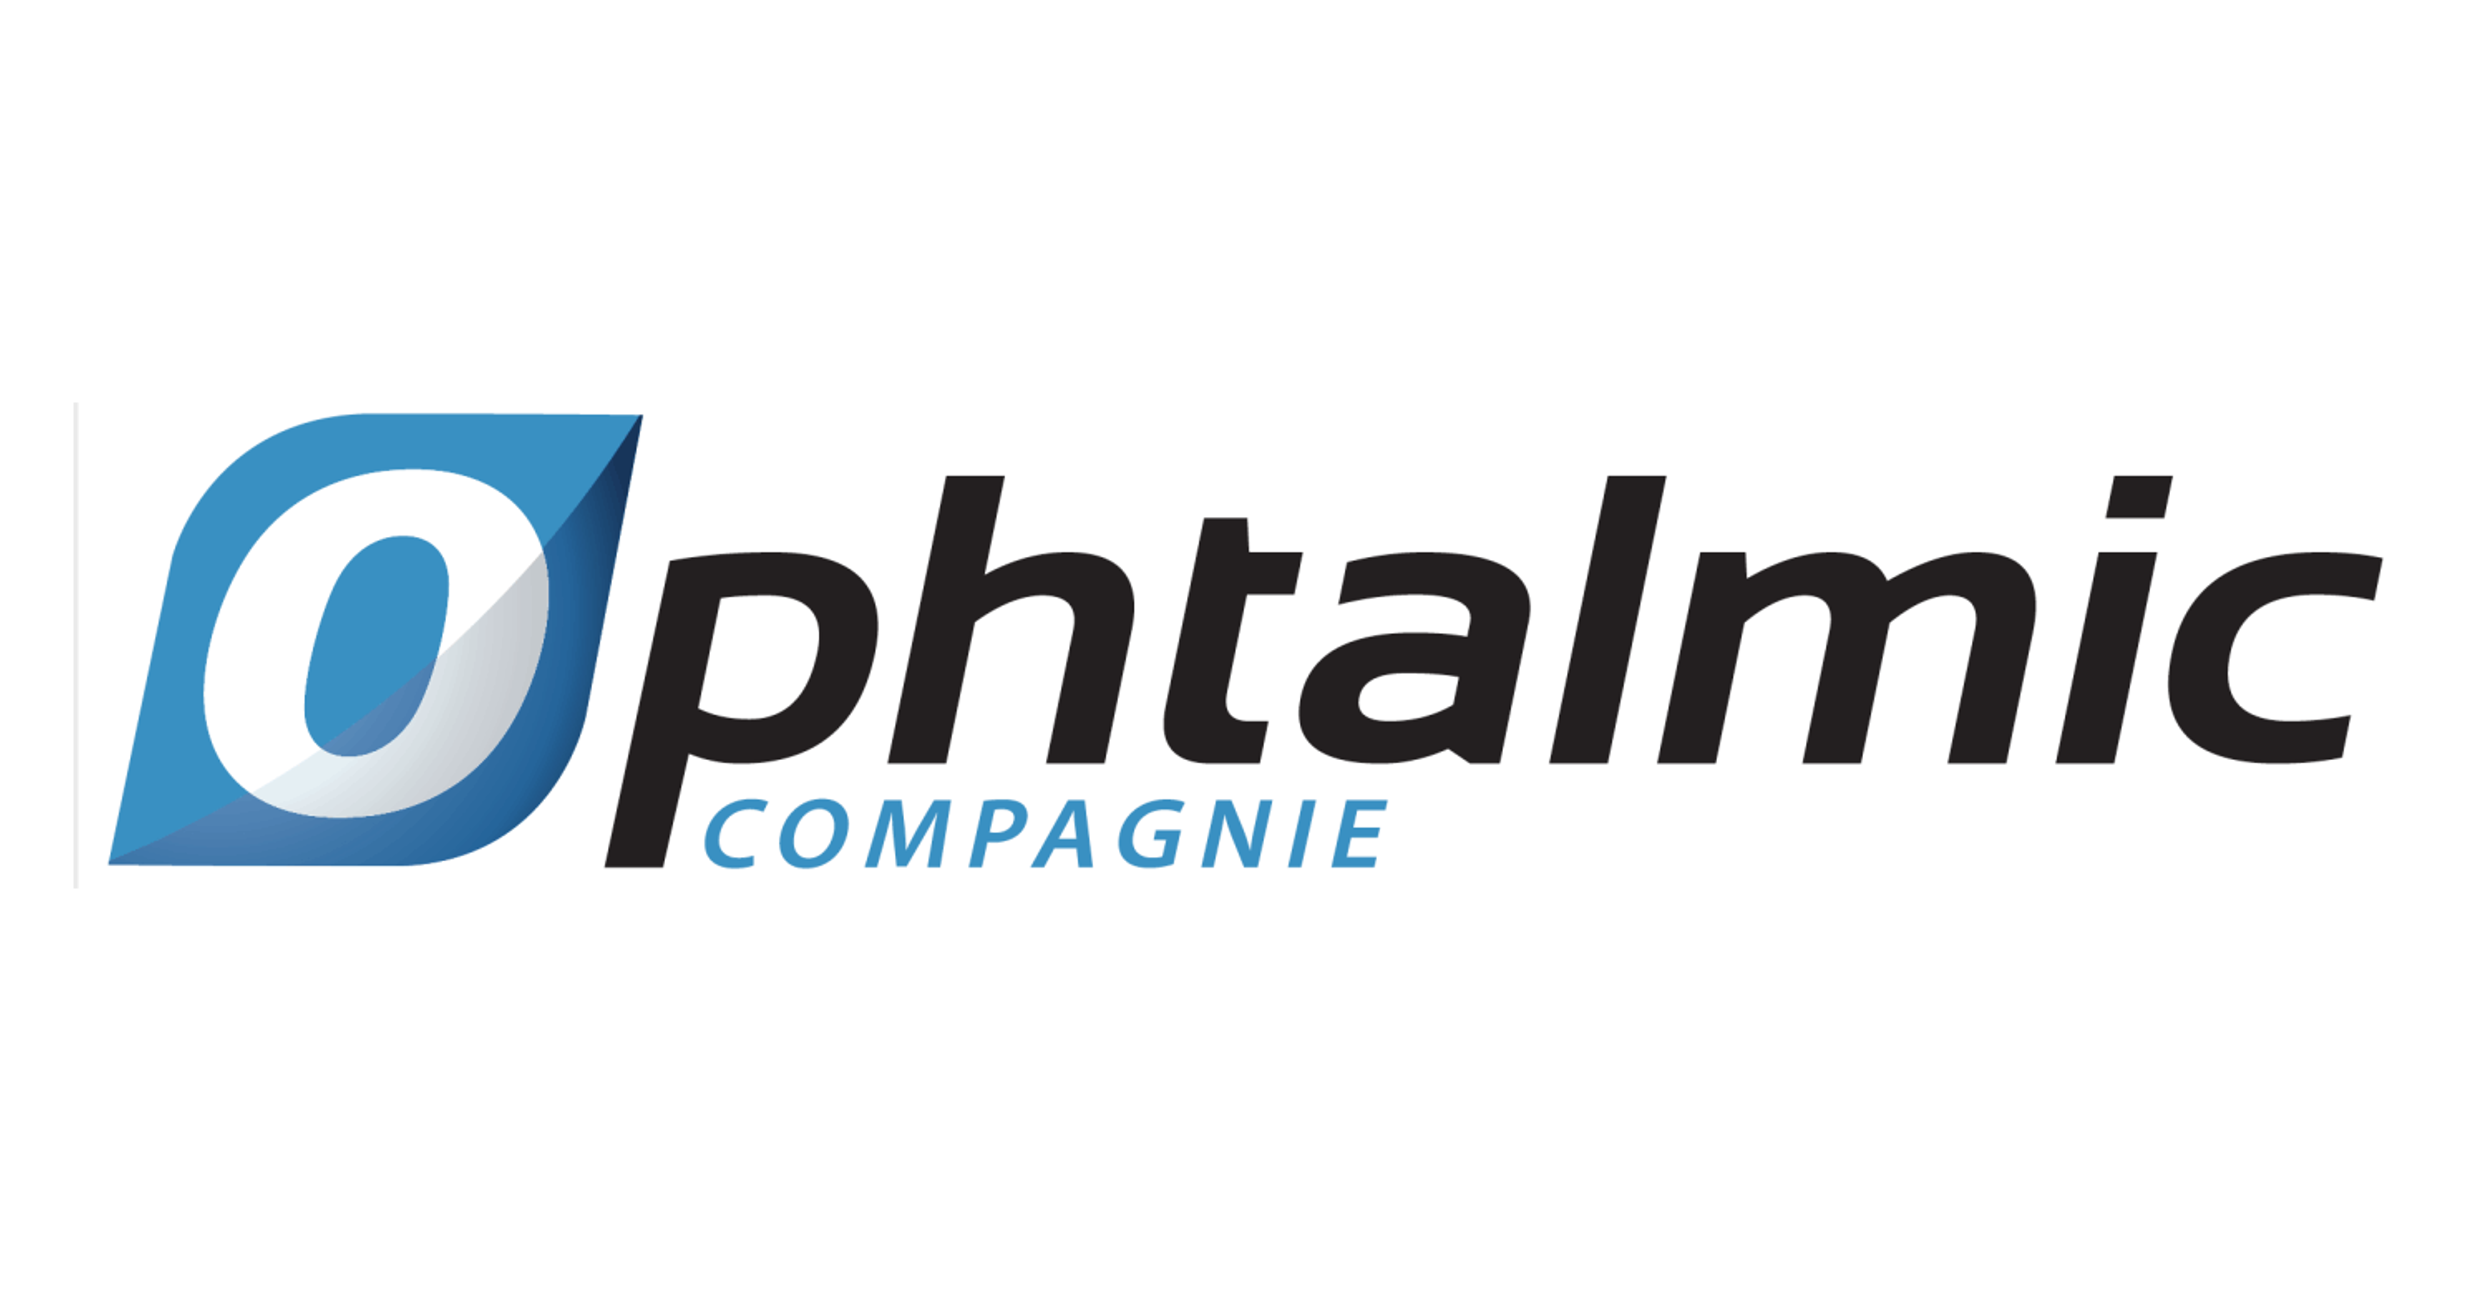 OPHTALMIC COMPAGNIE